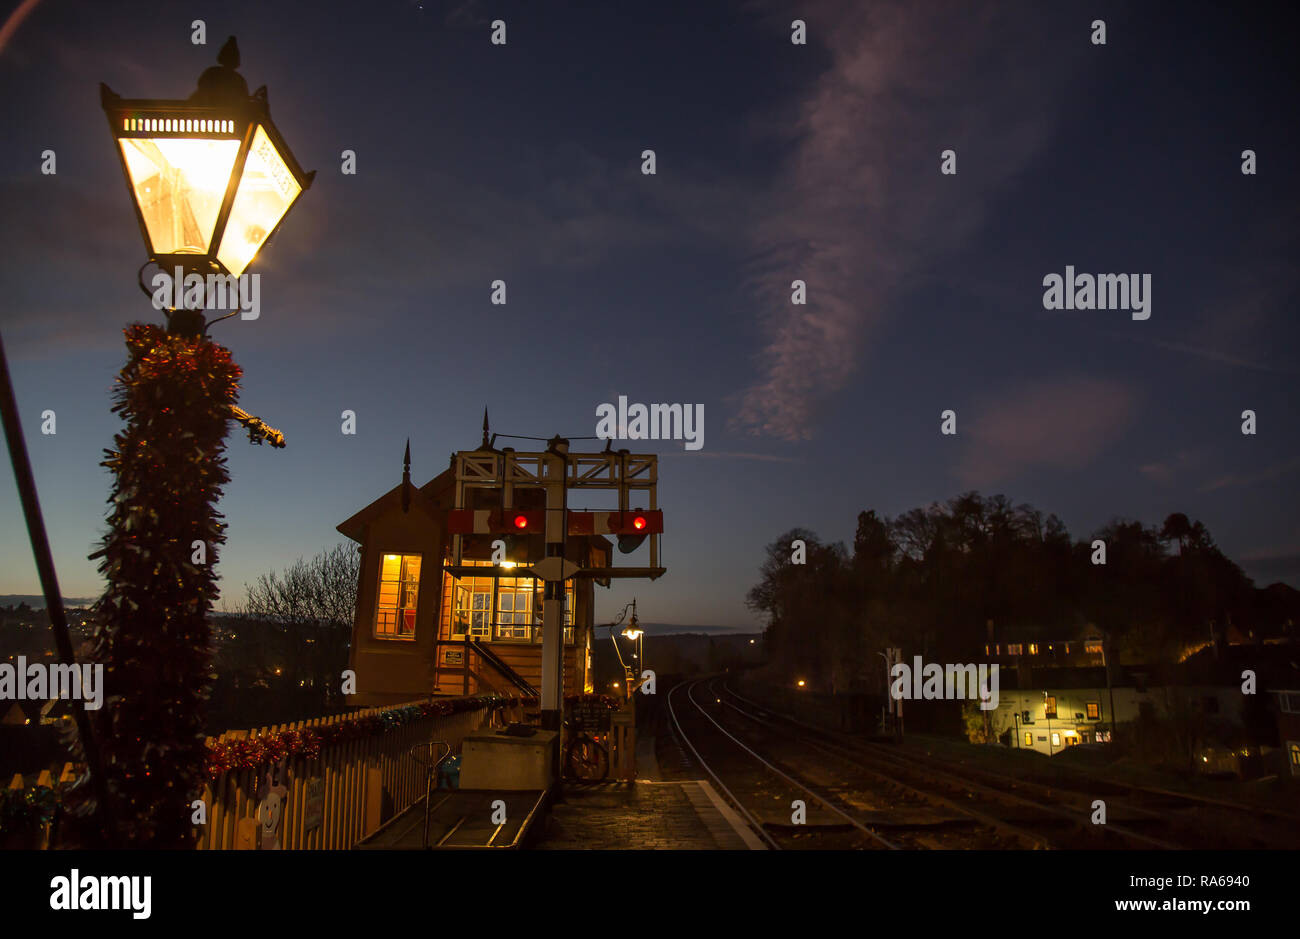 Bewdley, UK. 1st January, 2019. UK weather: with skies clearing and a noticeable absence of cloud cover this evening, temperatures are falling sharply. As the last steam train leaves Bewdley station, signalling an end to the festive holiday season, a frosty start is expected for all returning to work in the morning. Credit: Lee Hudson/Alamy Live News Stock Photo